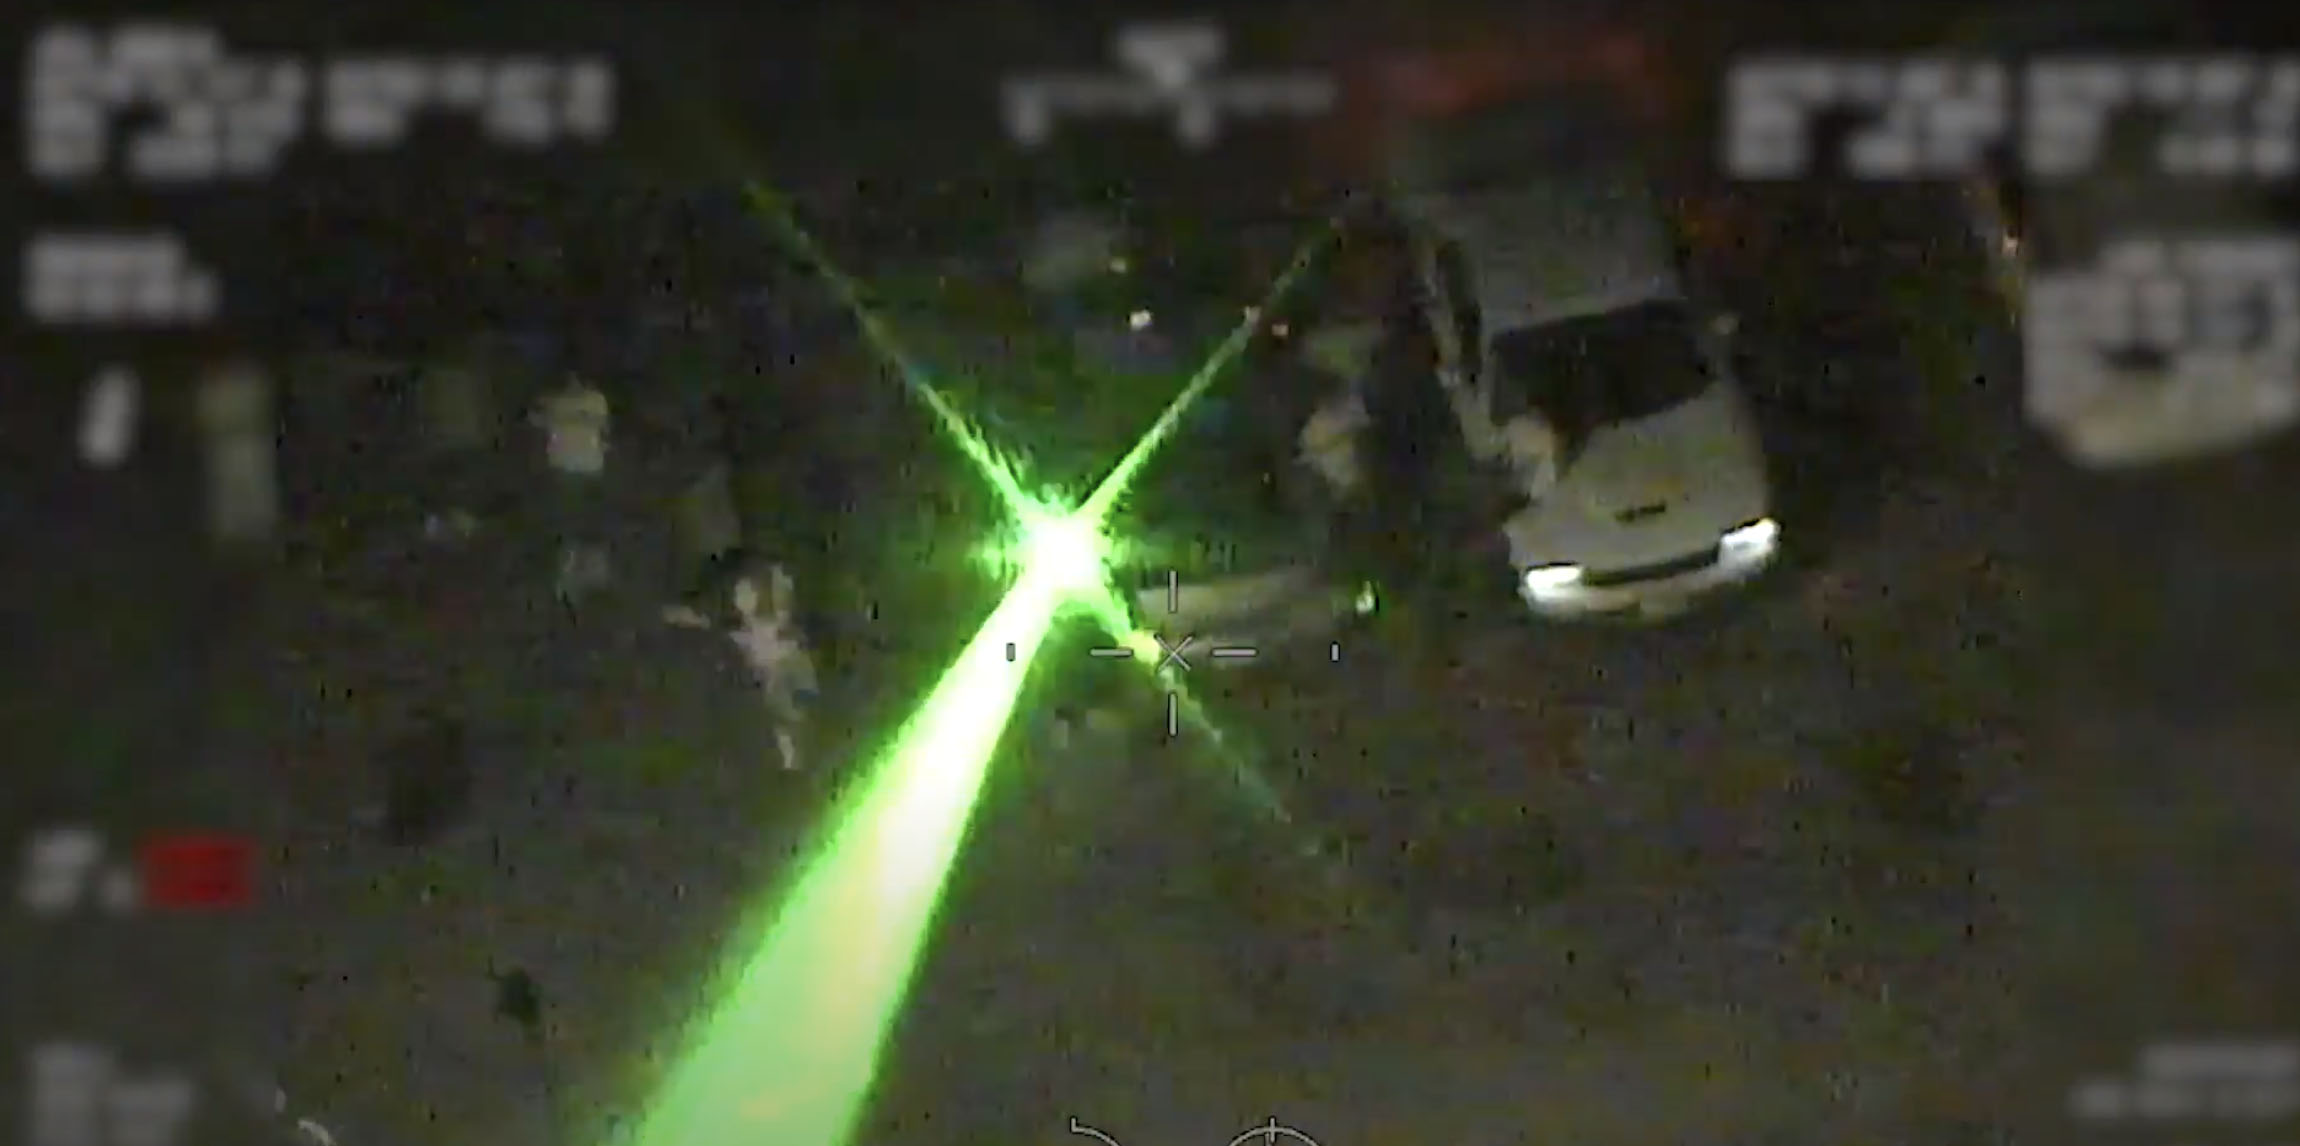 PHOTO: A U.S. CBP helicopter hovering over crowds of people at a Detroit protest on June 3, 2020, was struck multiple times by a green laser, fired from a person across the U.S.-Canadian border.